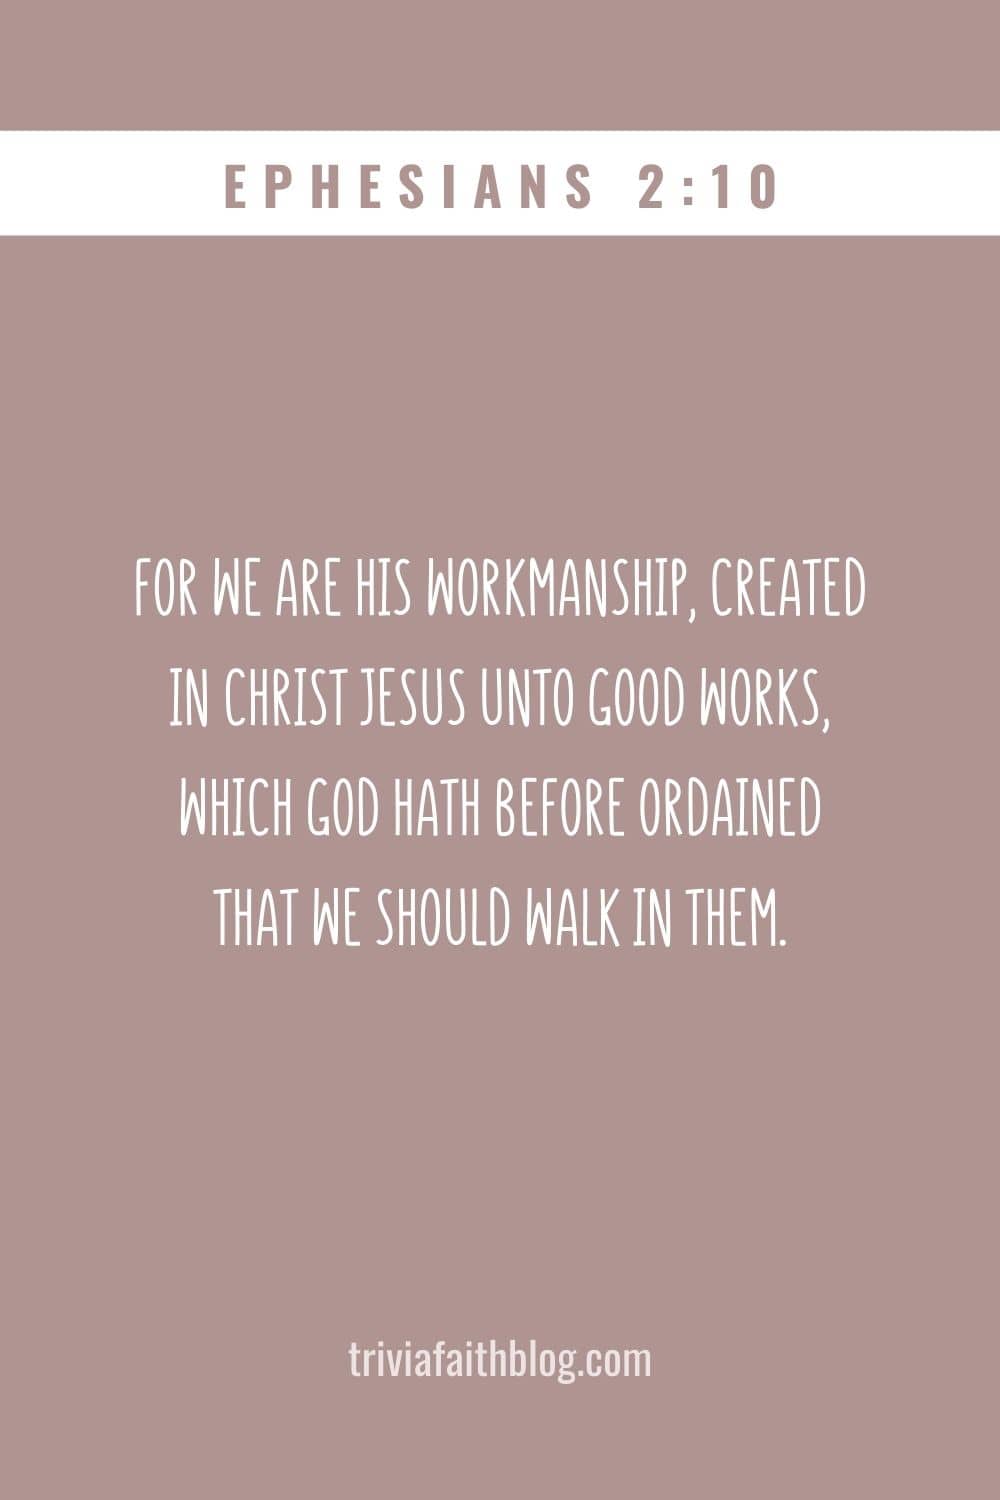 For we are his workmanship, created in Christ Jesus unto good works, which God hath before ordained that we should walk in them